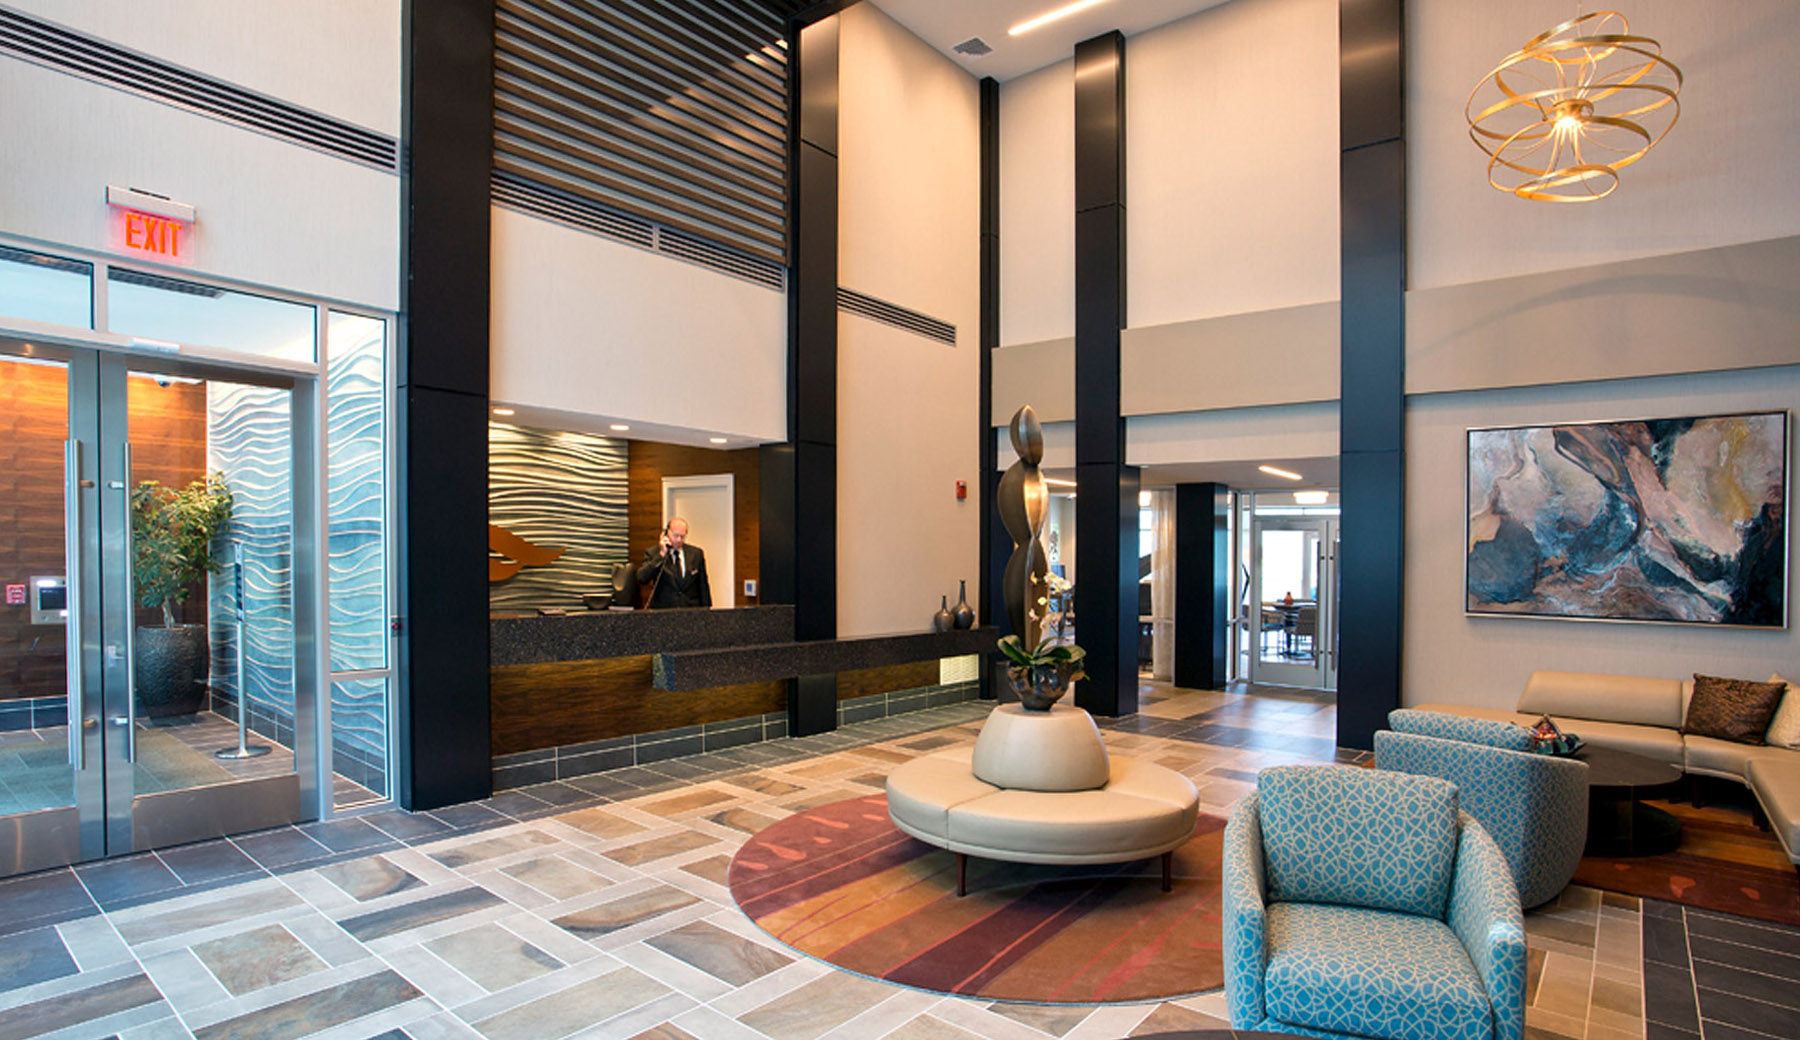 The Two-Story Lobby creates a grand entrance into the building with a slatted wood canopy and gold-leaf pendants. Custom sofas and area rugs welcome residents and visitors into the space.